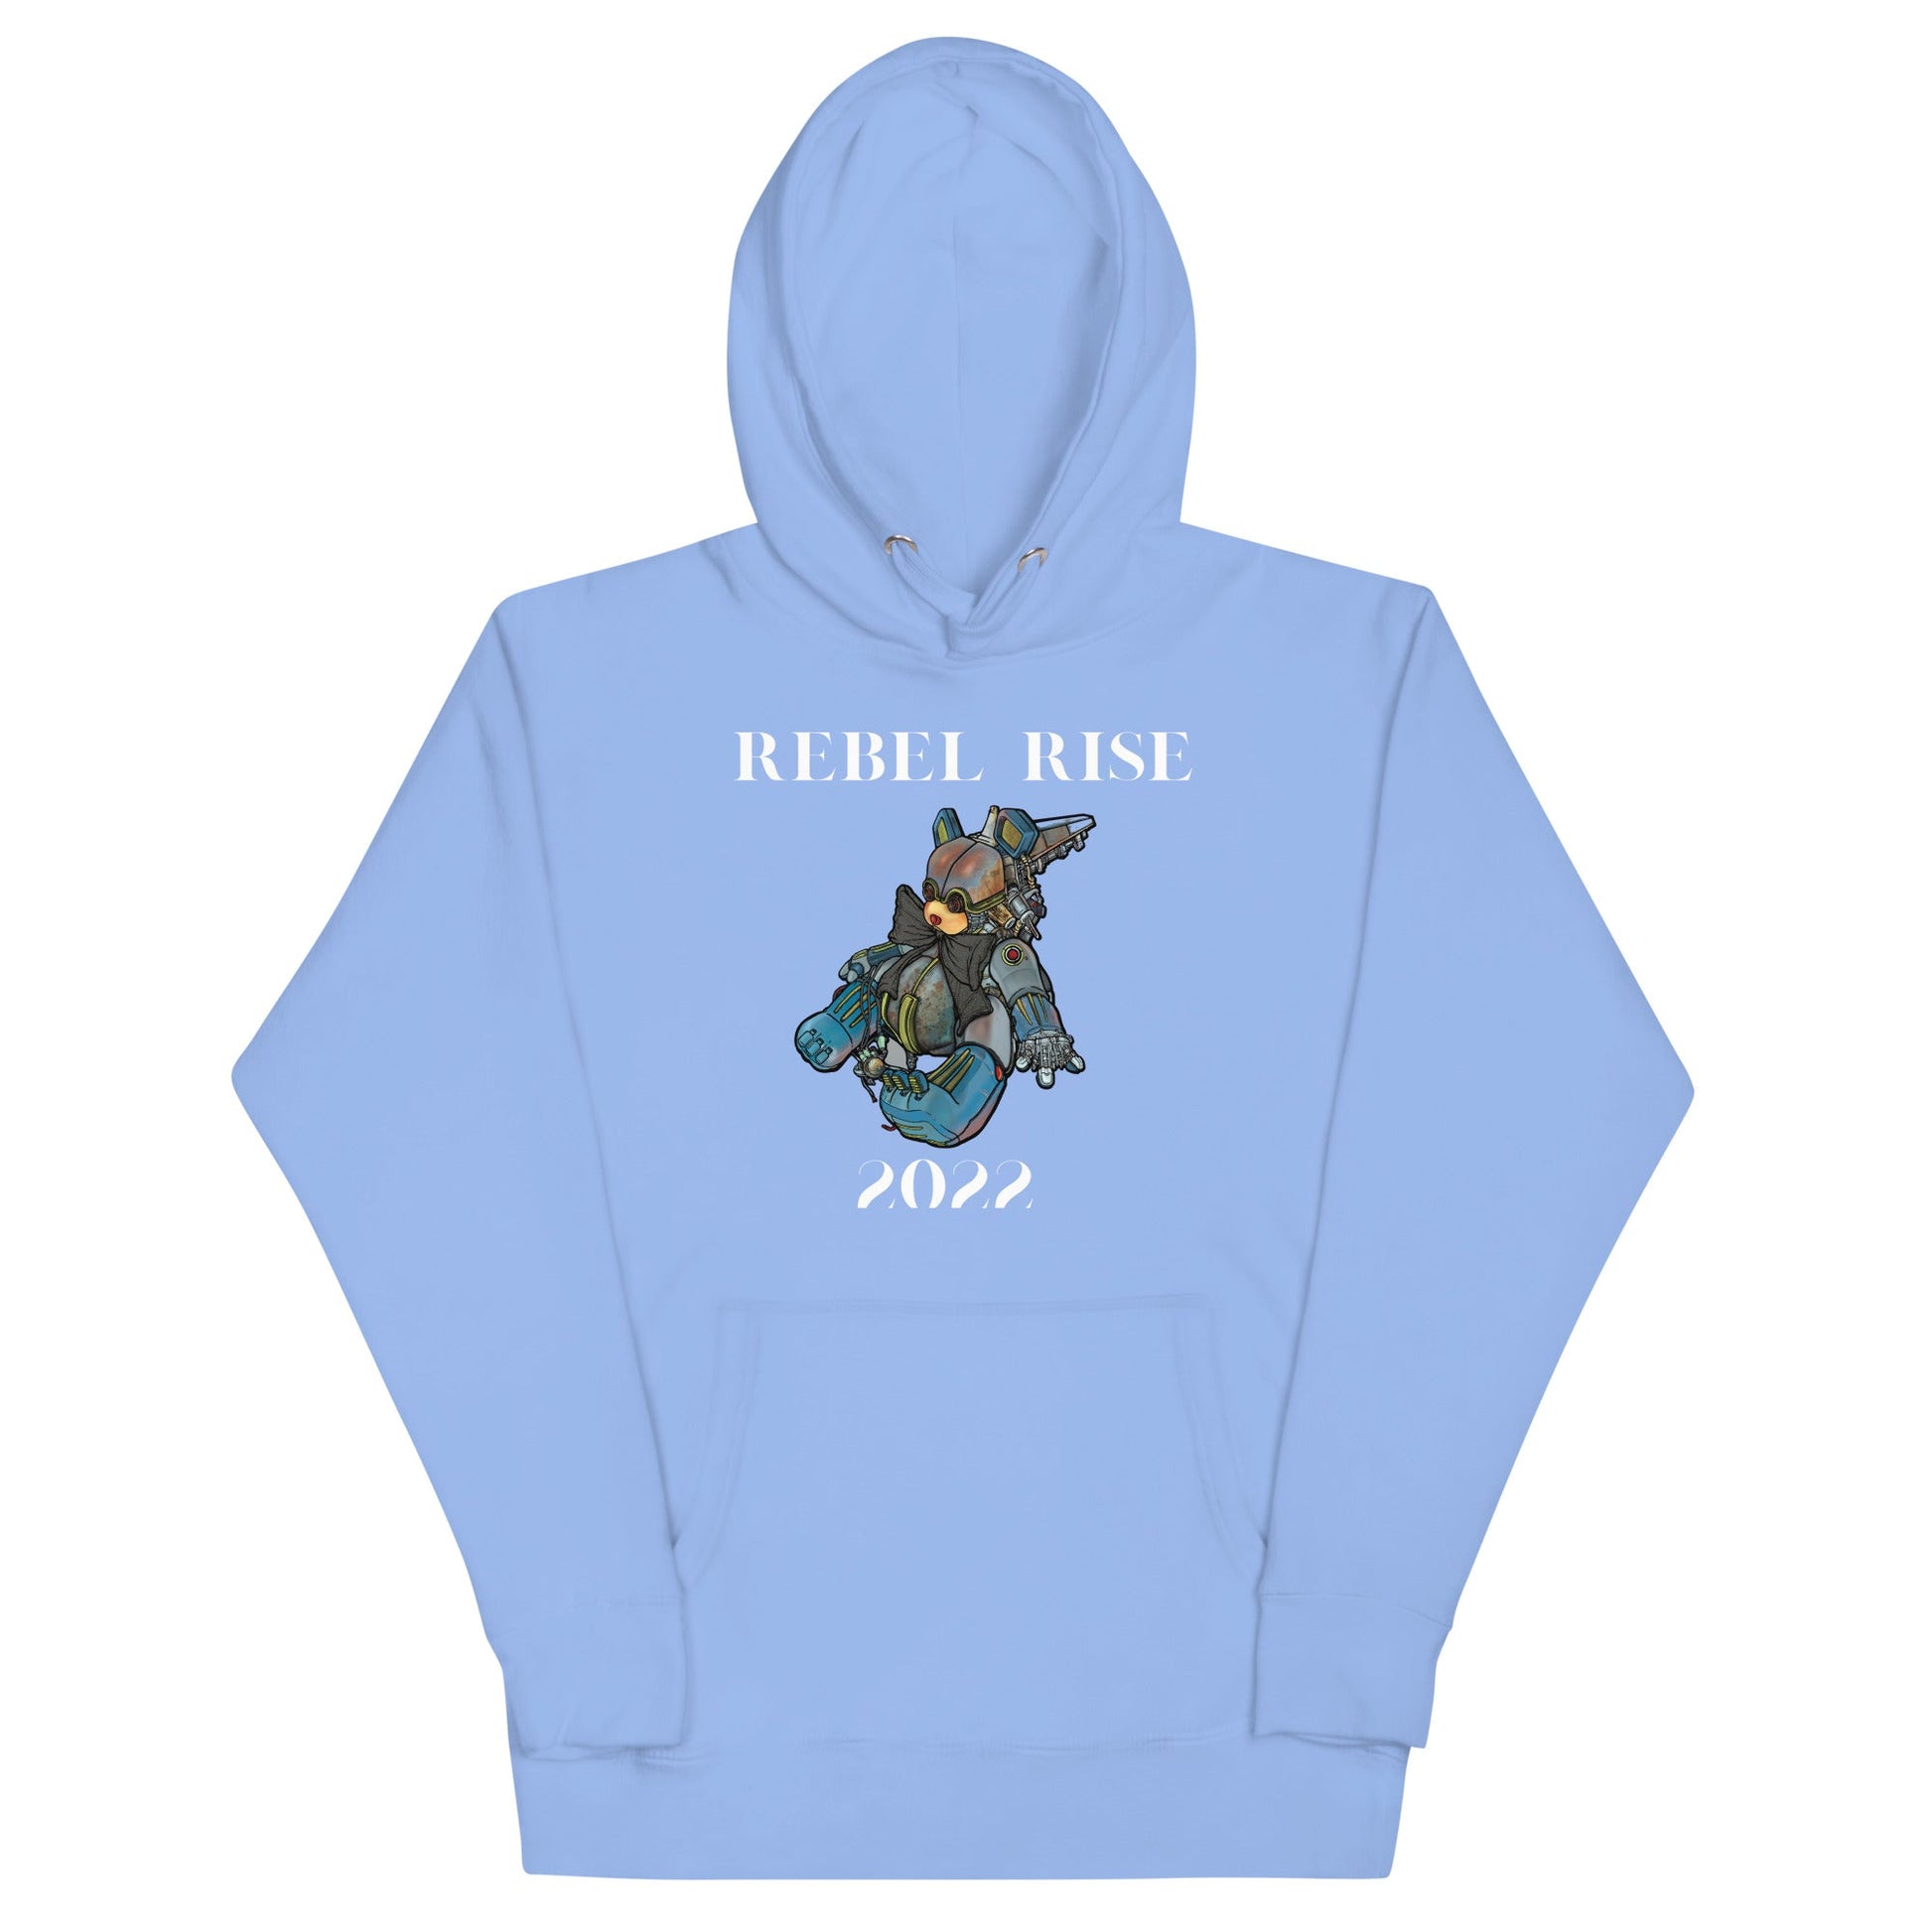 Rebel Rise Men Hoodie Collection Quality Clothing Brand. - Seth Society